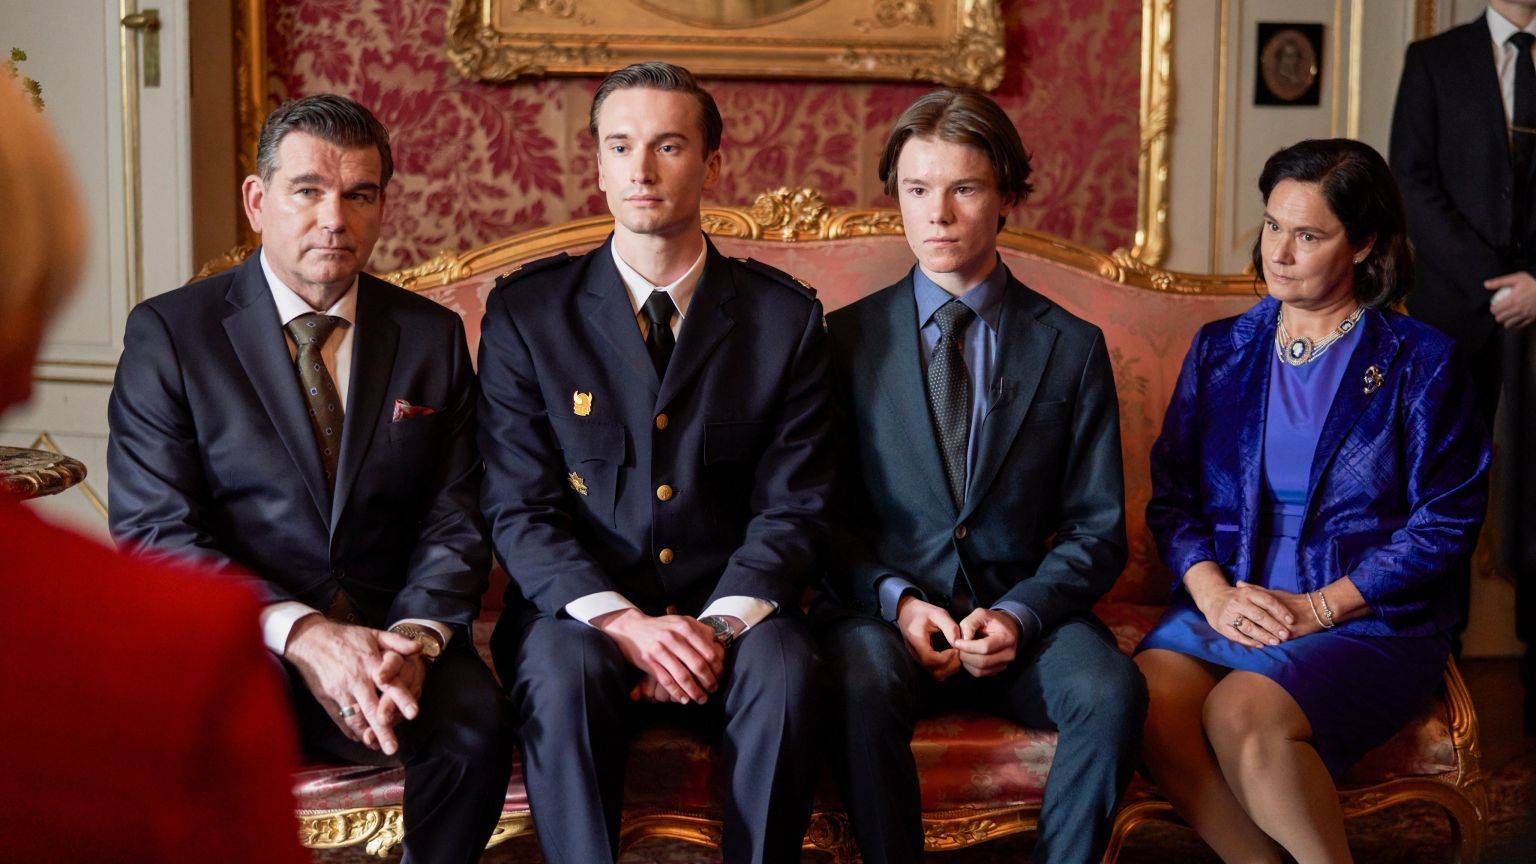 Young Royals Season 1 Release Date, Trailer, Cast and Updates!